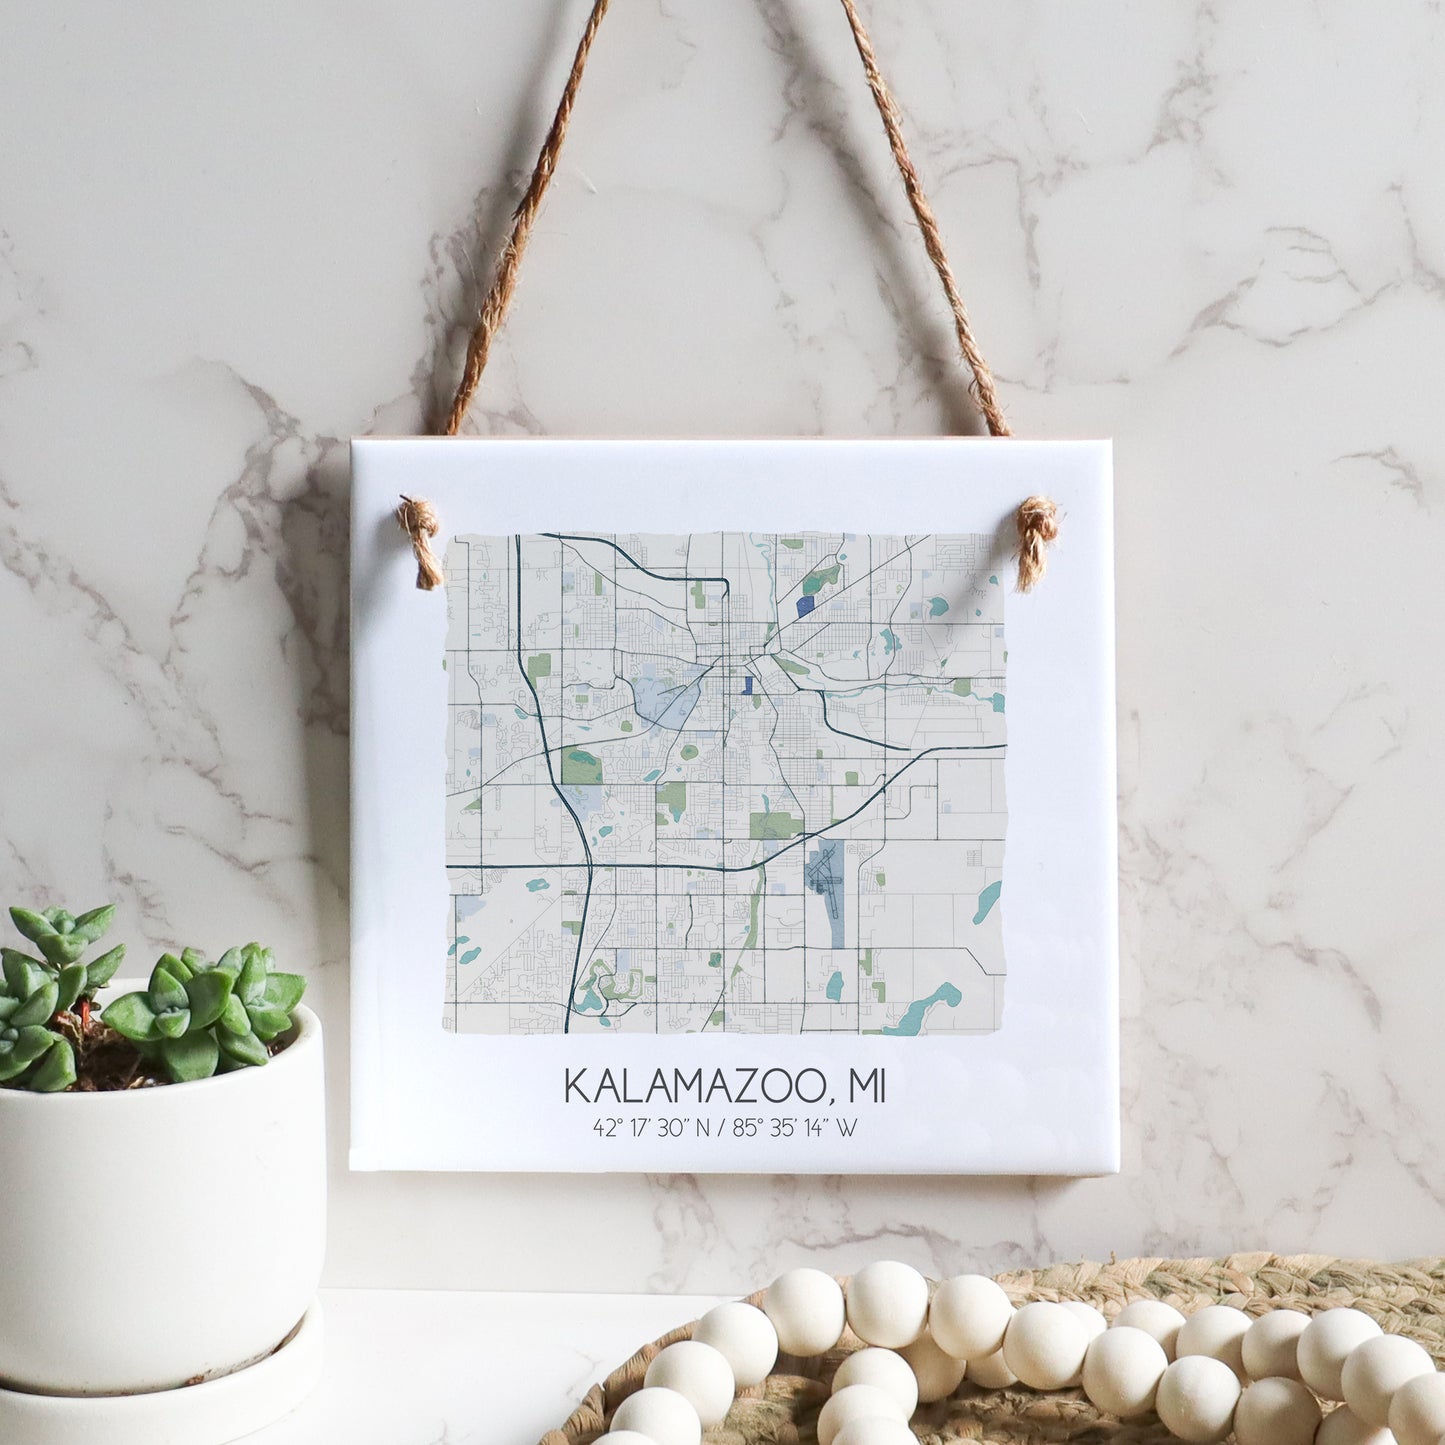 A city map of Kalamazoo MI on a square ceramic tile sign hanging on a wall, in the color beige